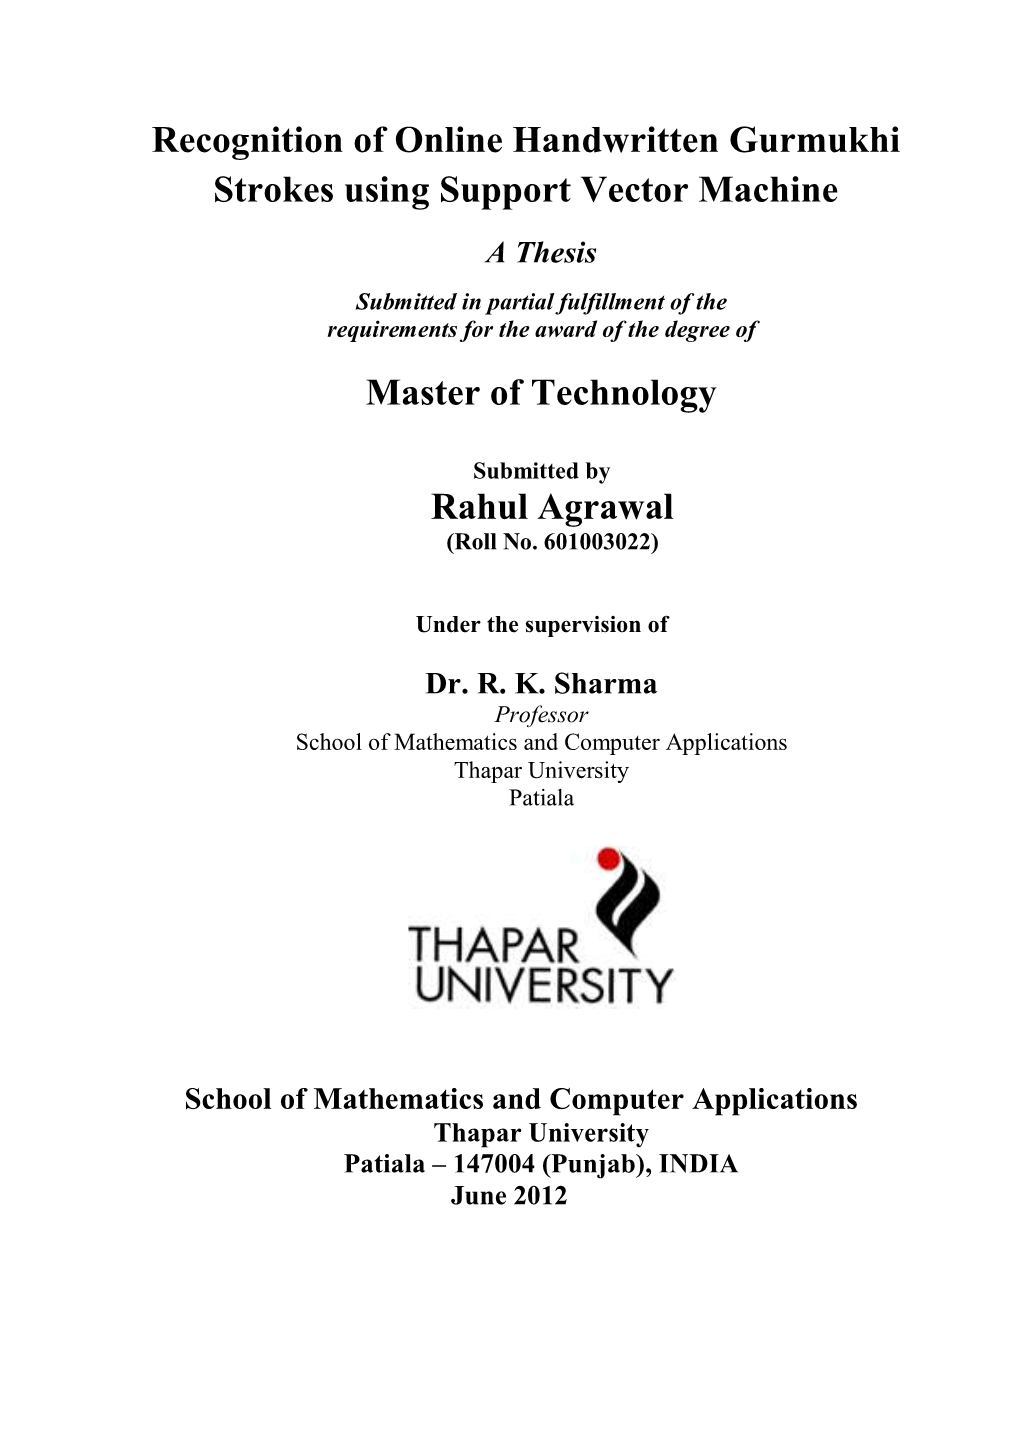 Recognition of Online Handwritten Gurmukhi Strokes Using Support Vector Machine a Thesis